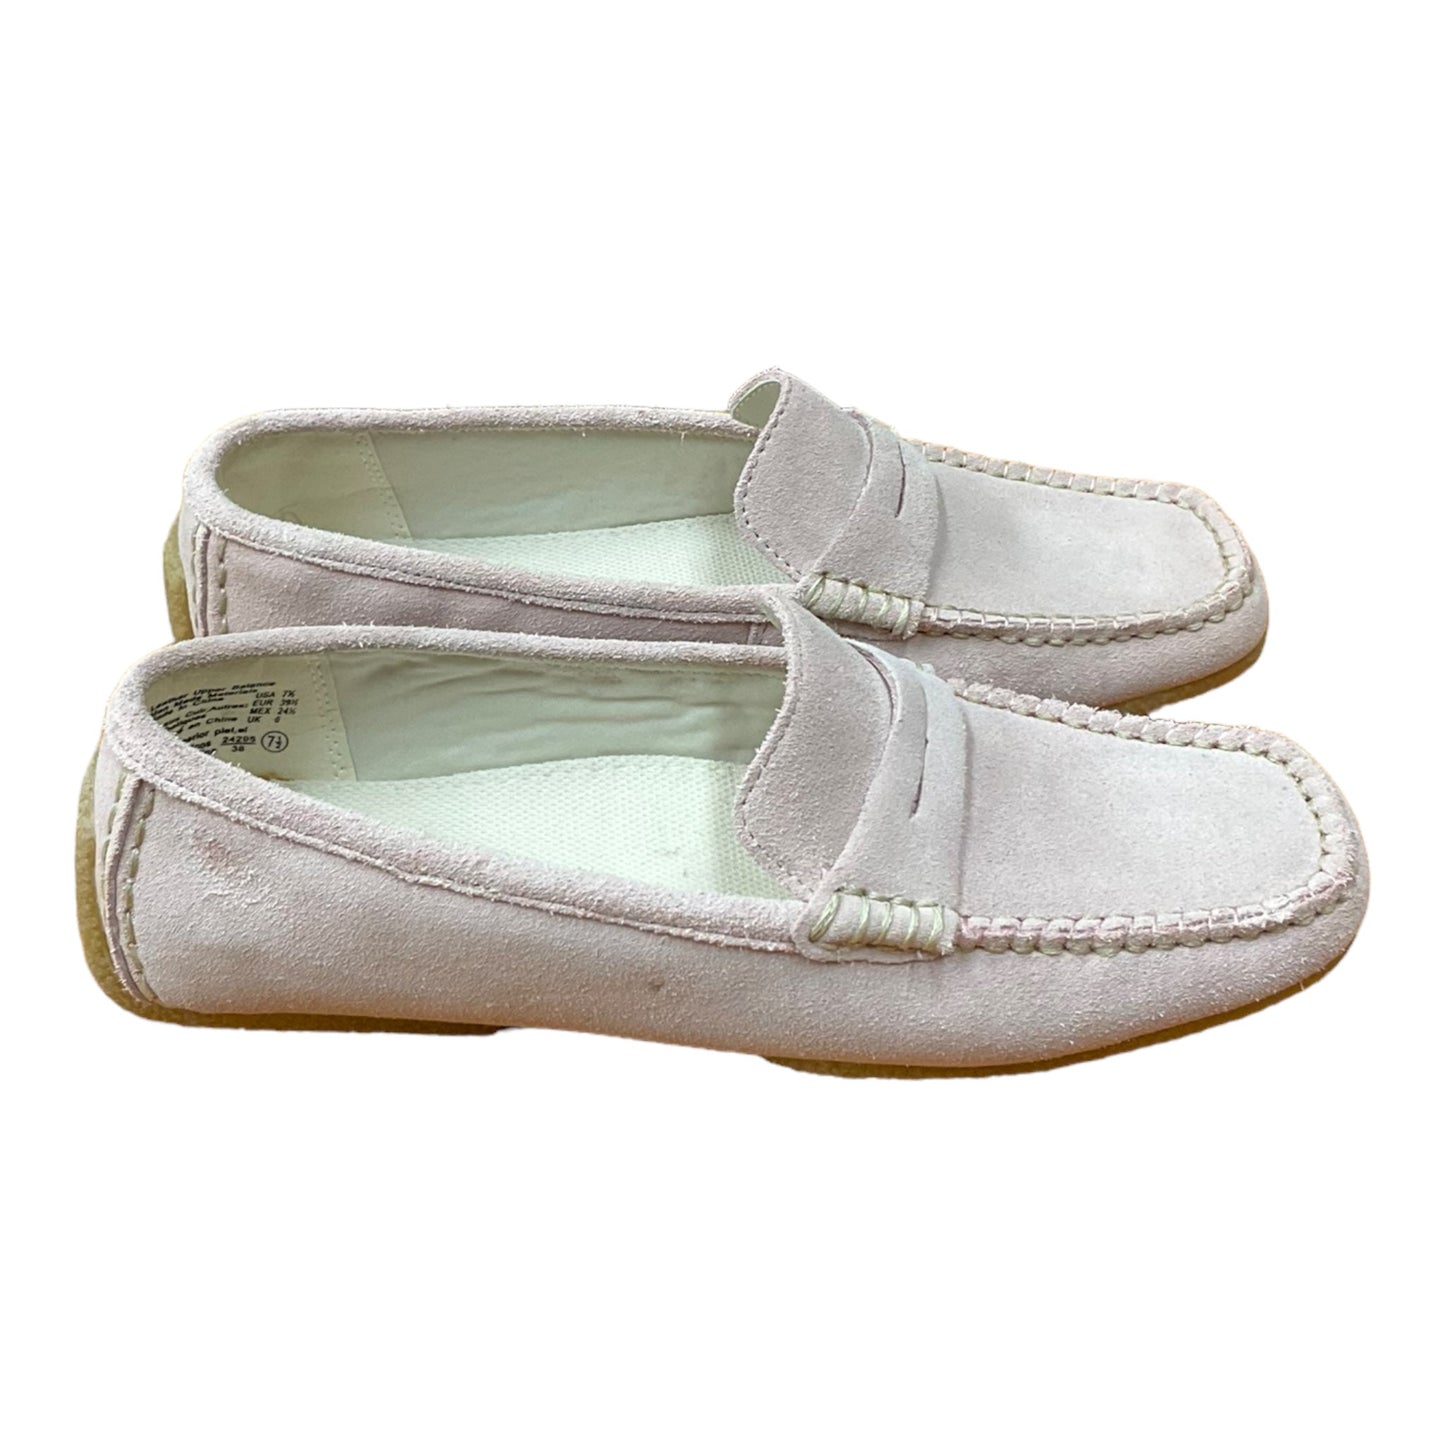 Shoes Flats Loafer Oxford By Predictions  Size: 7.5